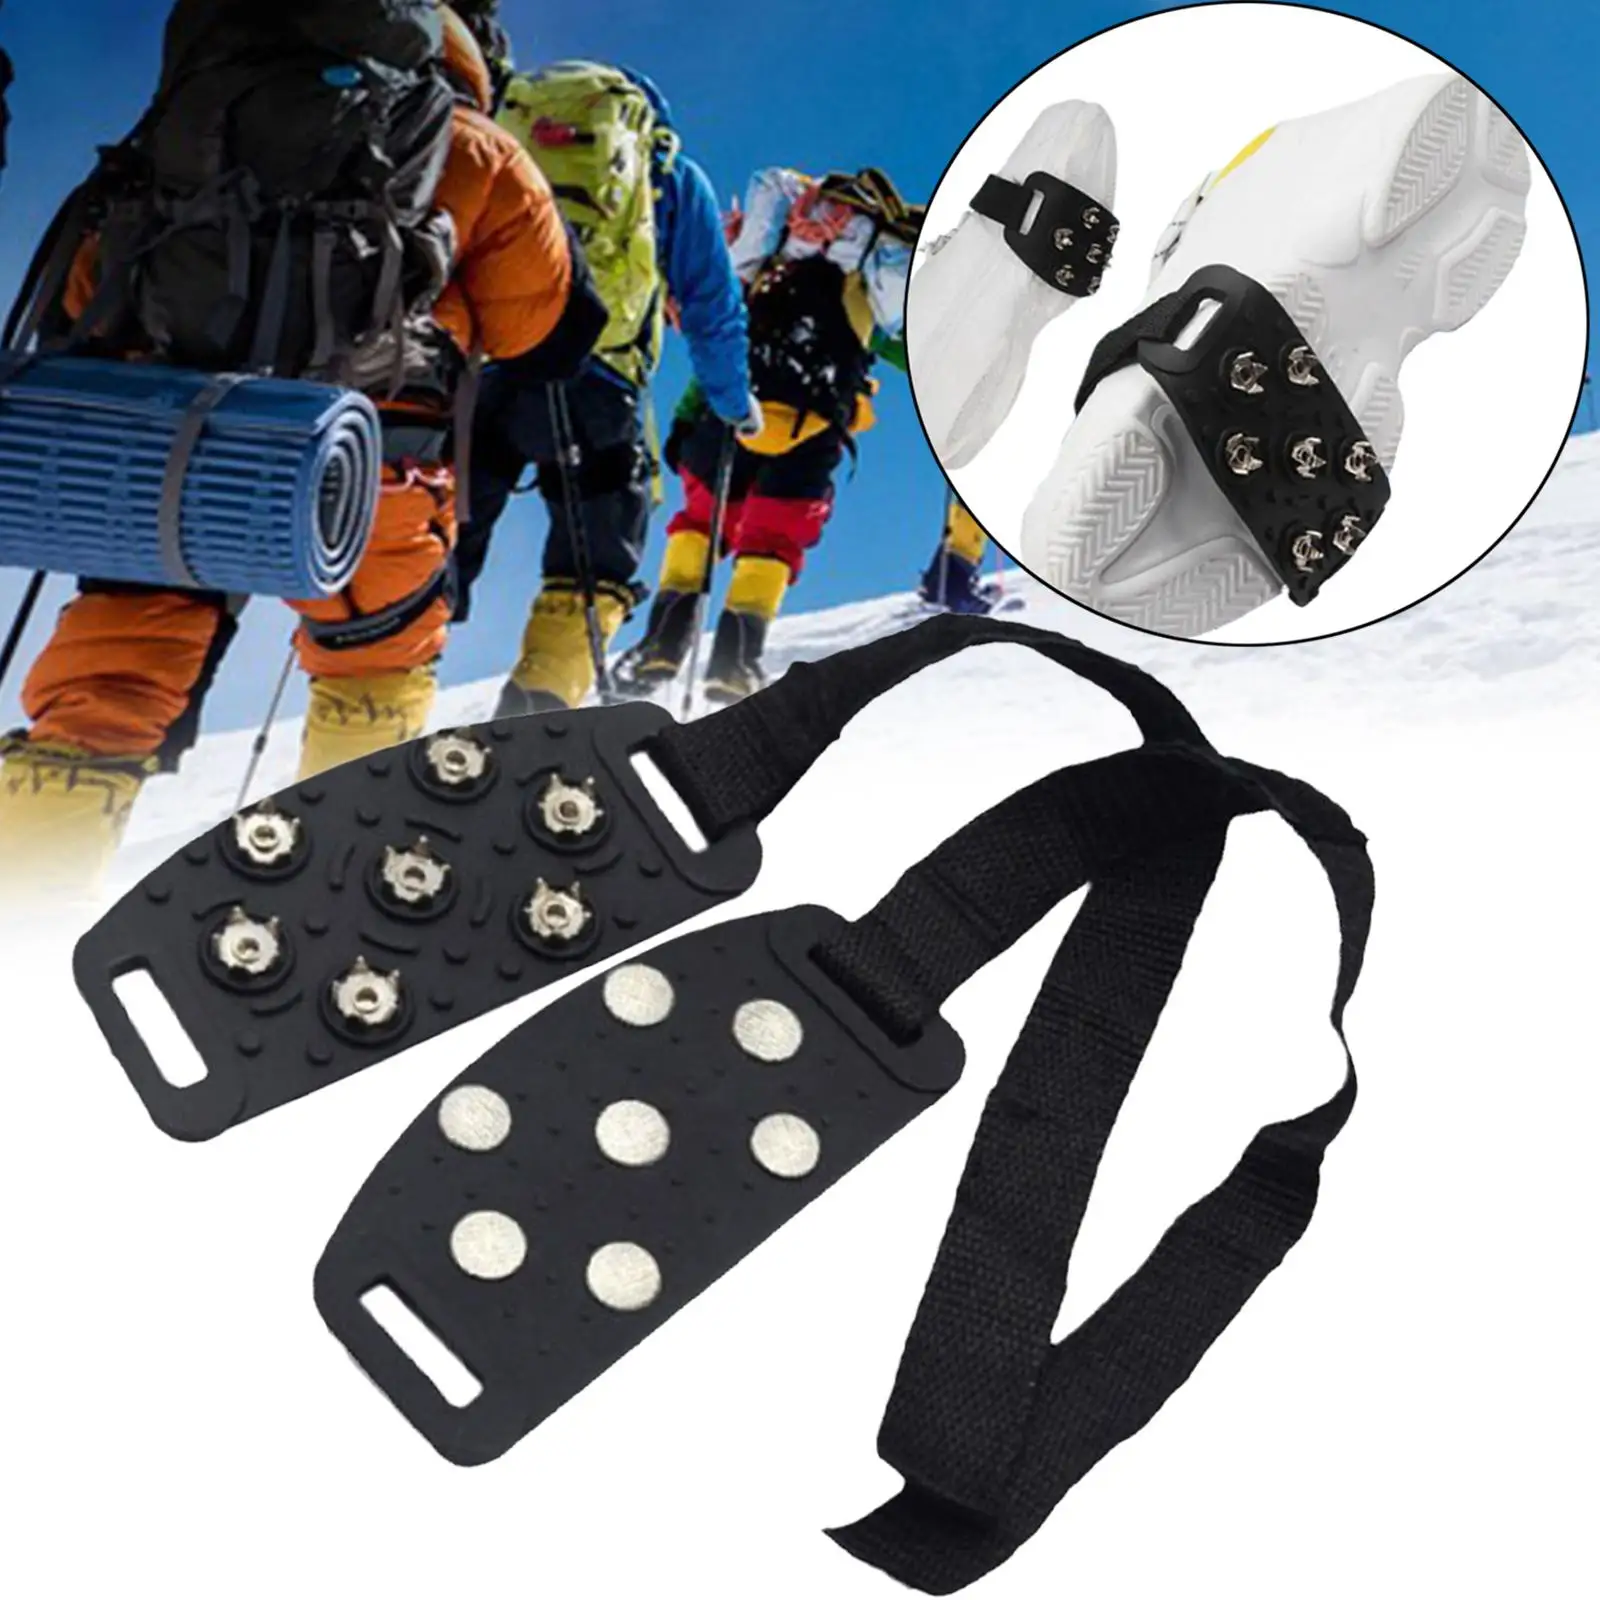 Shoe Spikes Shoes Cover Lightweight Shoe Crampons for Snow and Ice for Hiking Outdoor Activities Climbing Ice Fishing Men Women